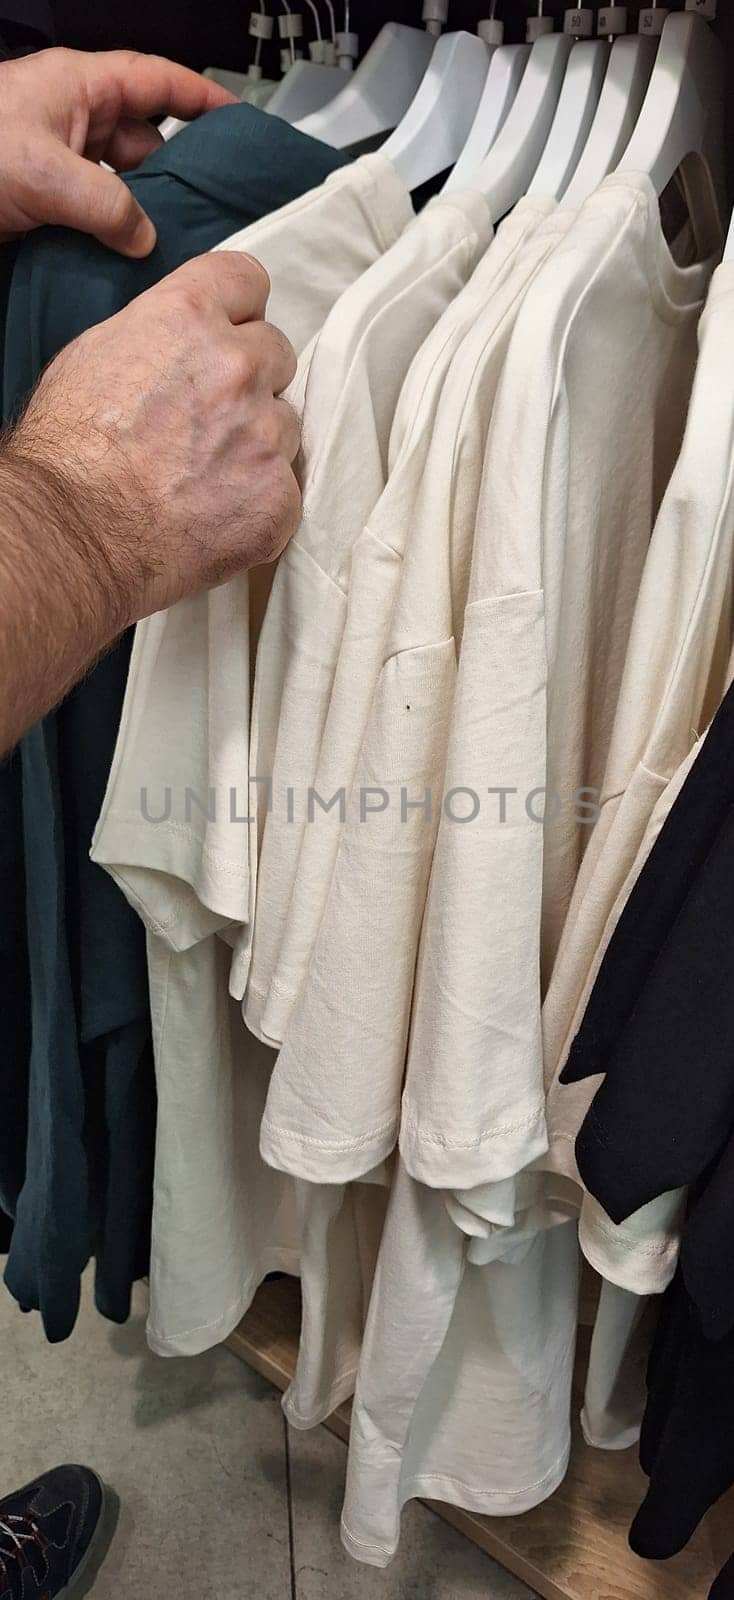 A person standing in front of a rack of shirts, holding one up for inspection.